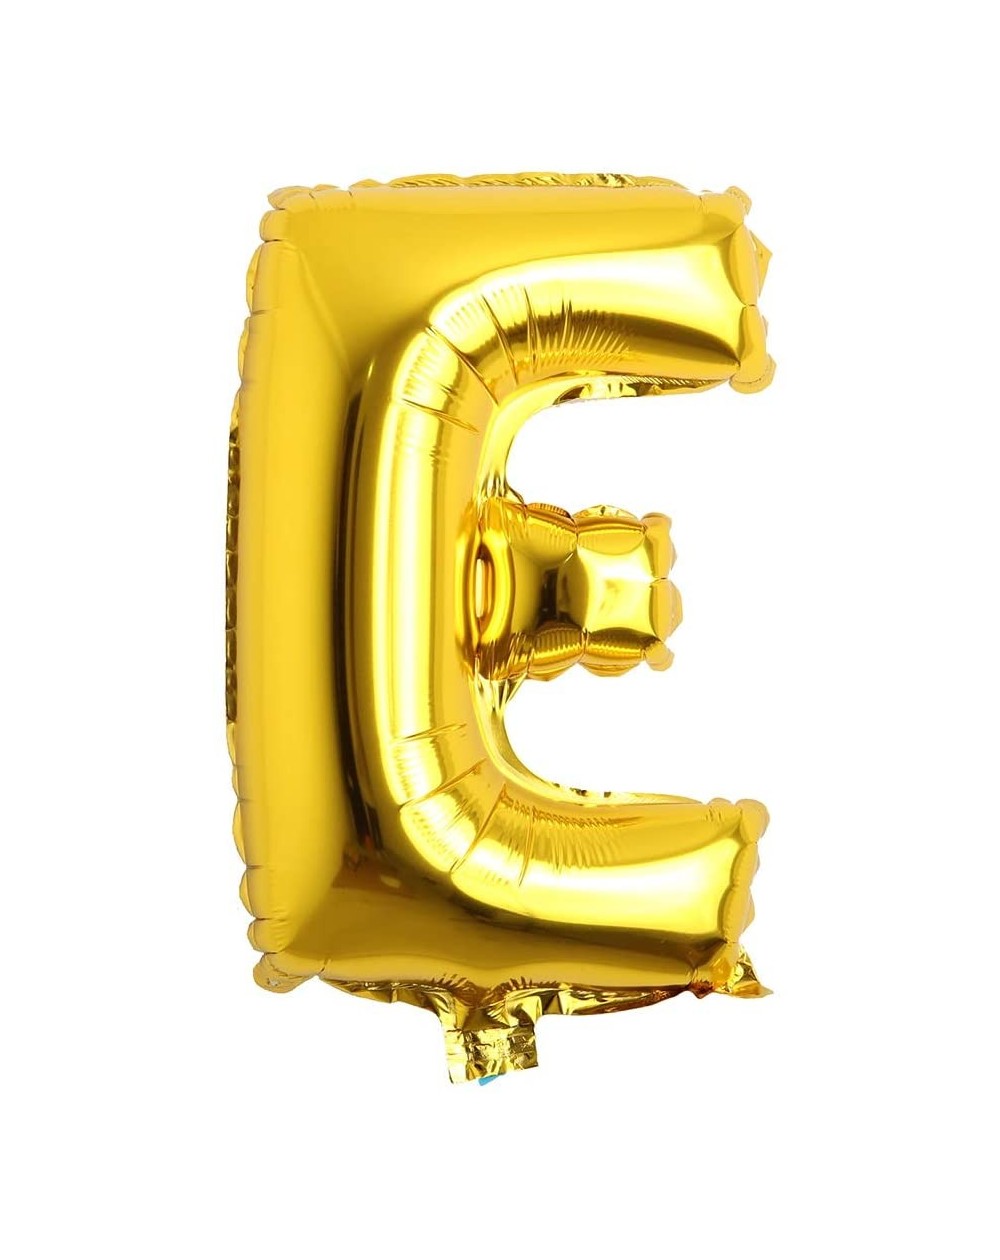 Balloons 16" inch Single Gold Alphabet Letter Number Balloons Aluminum Hanging Foil Film Balloon Wedding Birthday Party Decor...